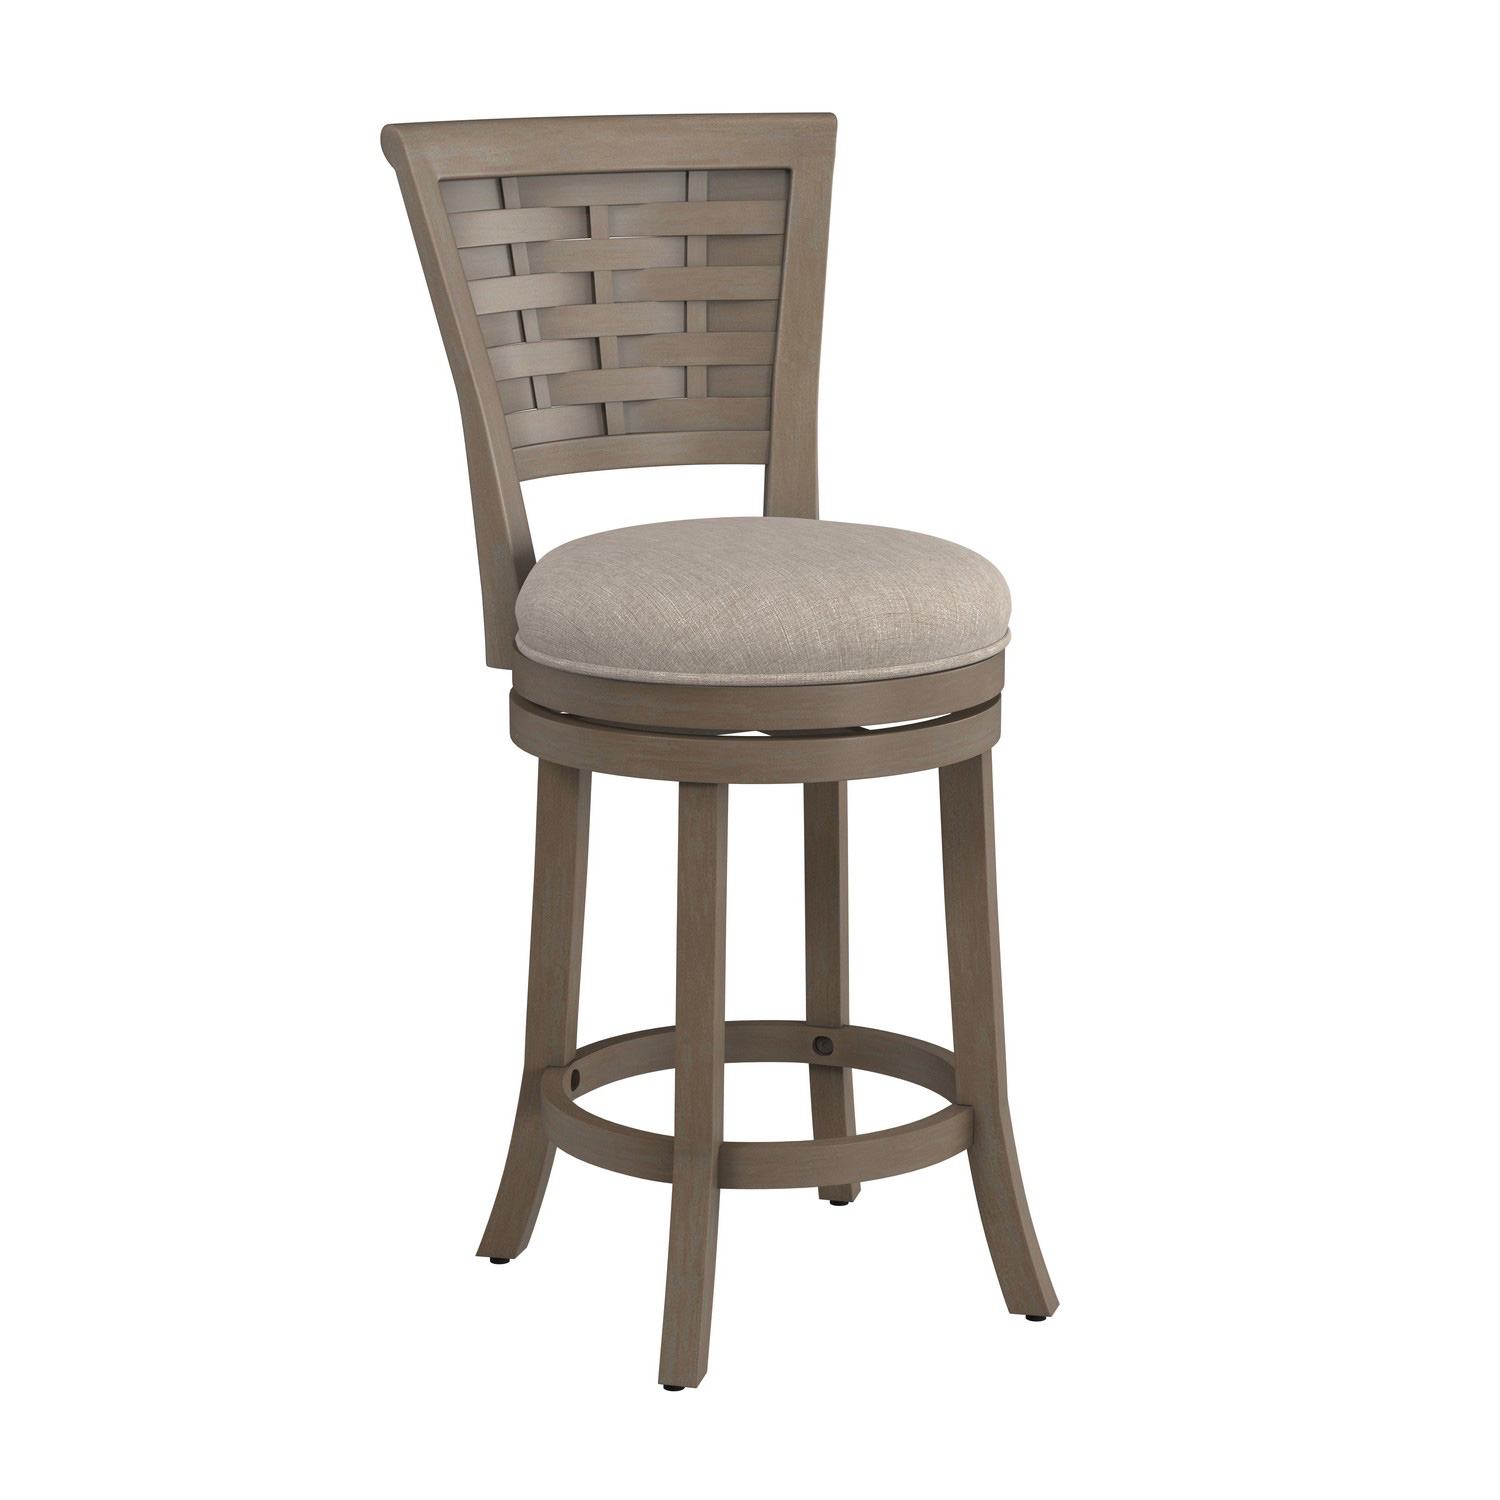 Hillsdale Thredson Wood Counter Height Swivel Stool - Light Antique Gray wash